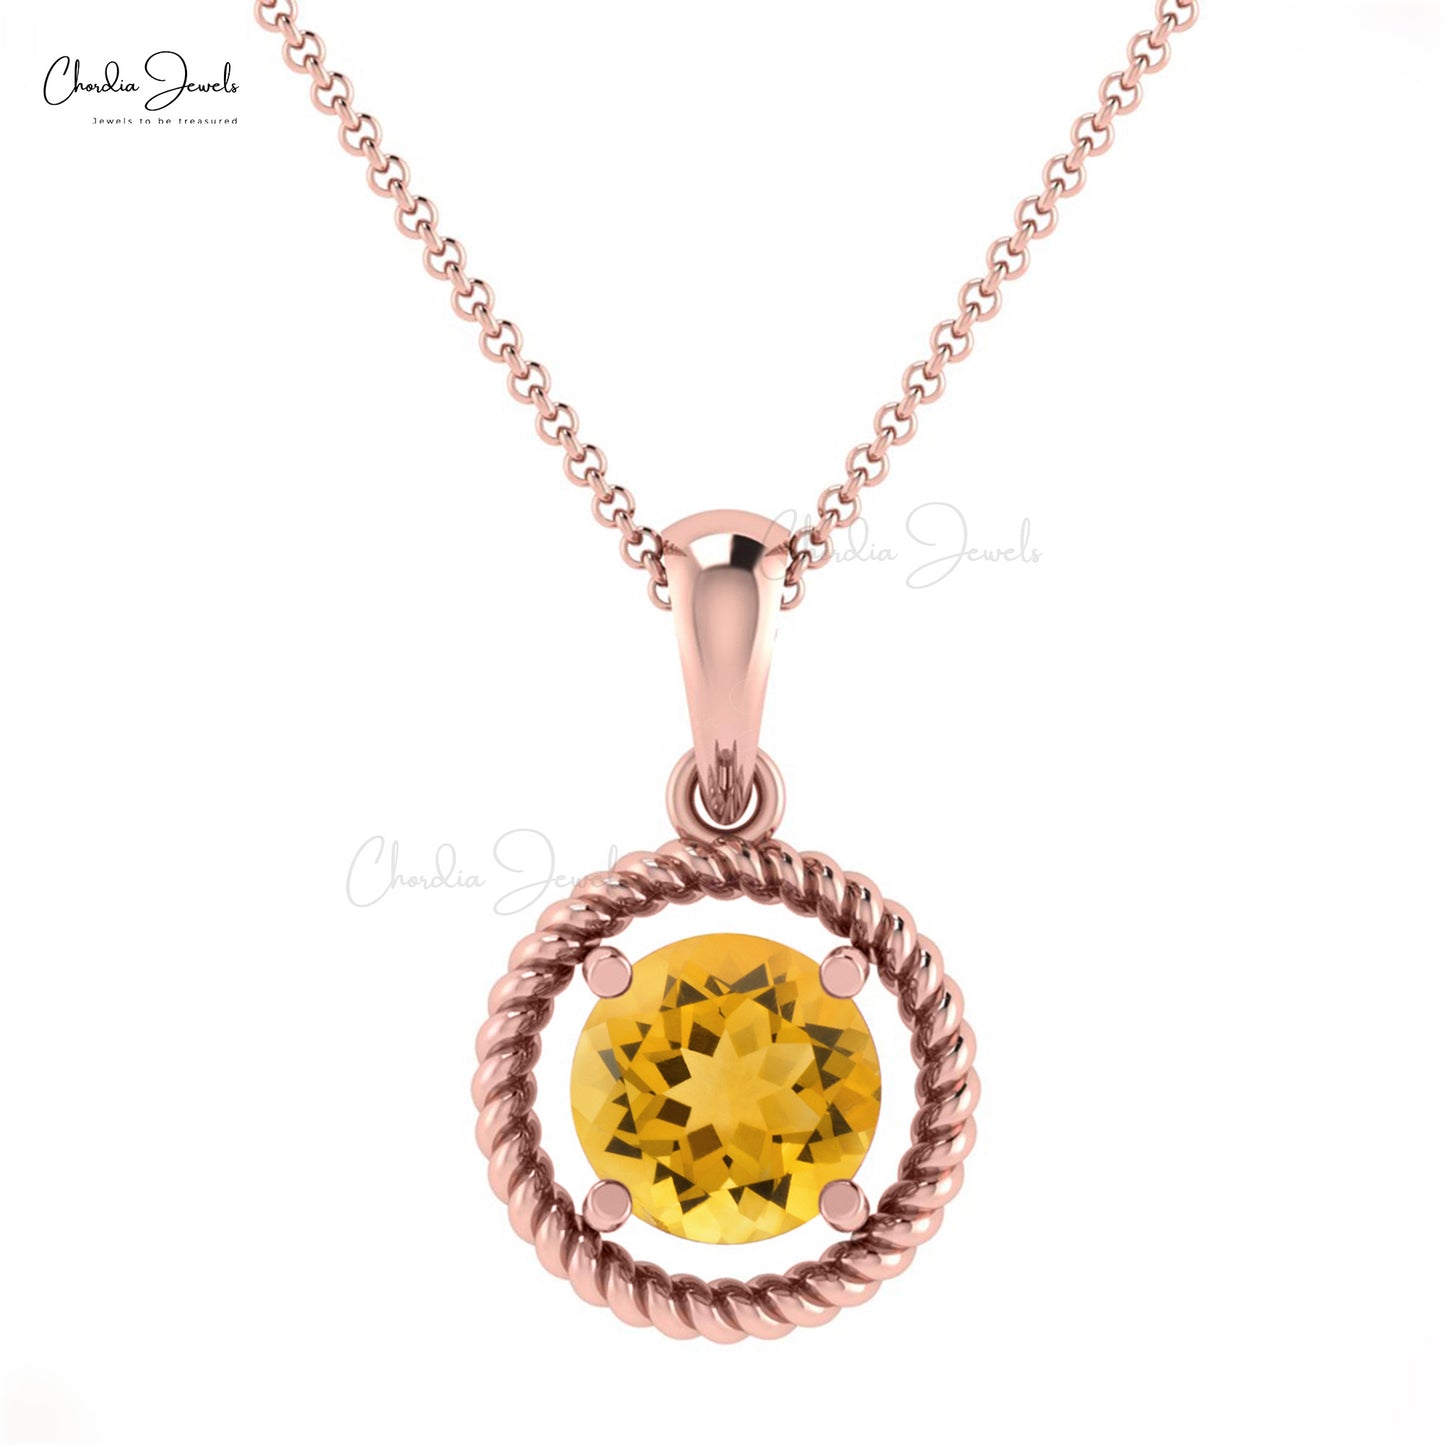 Classic Design Beautiful Spiral Pendant Necklace November Birthstone Natural Yellow Citrine Gemstone  Pendant in 14k Real Gold Dainty Jewelry For Her